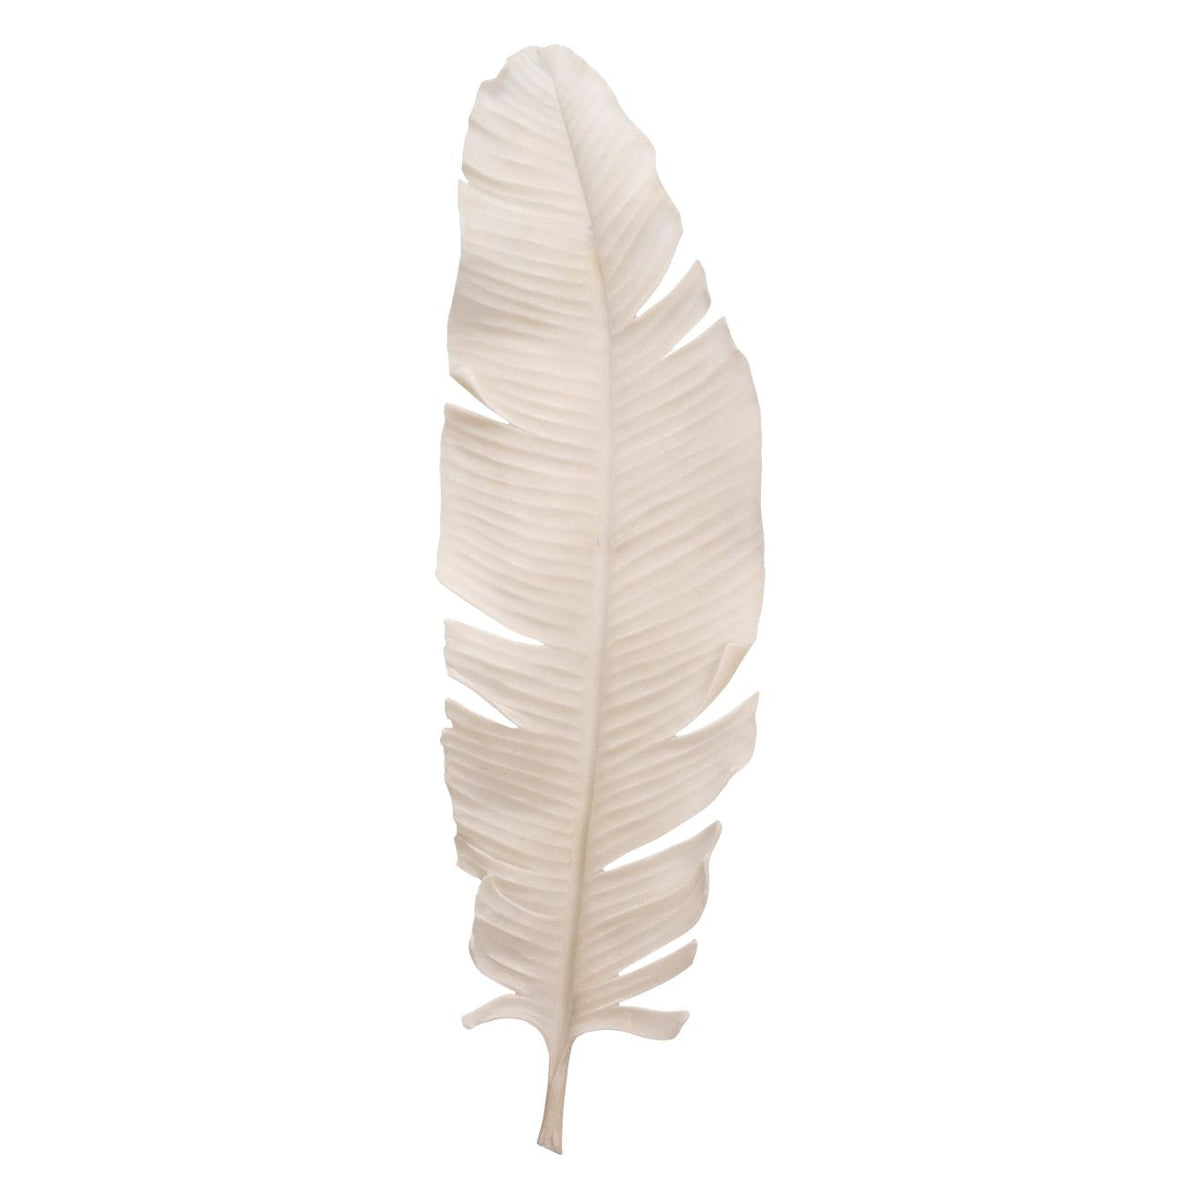 Jamie Young Company - 7FEAT-LGWH - Feather Object - Feather - White